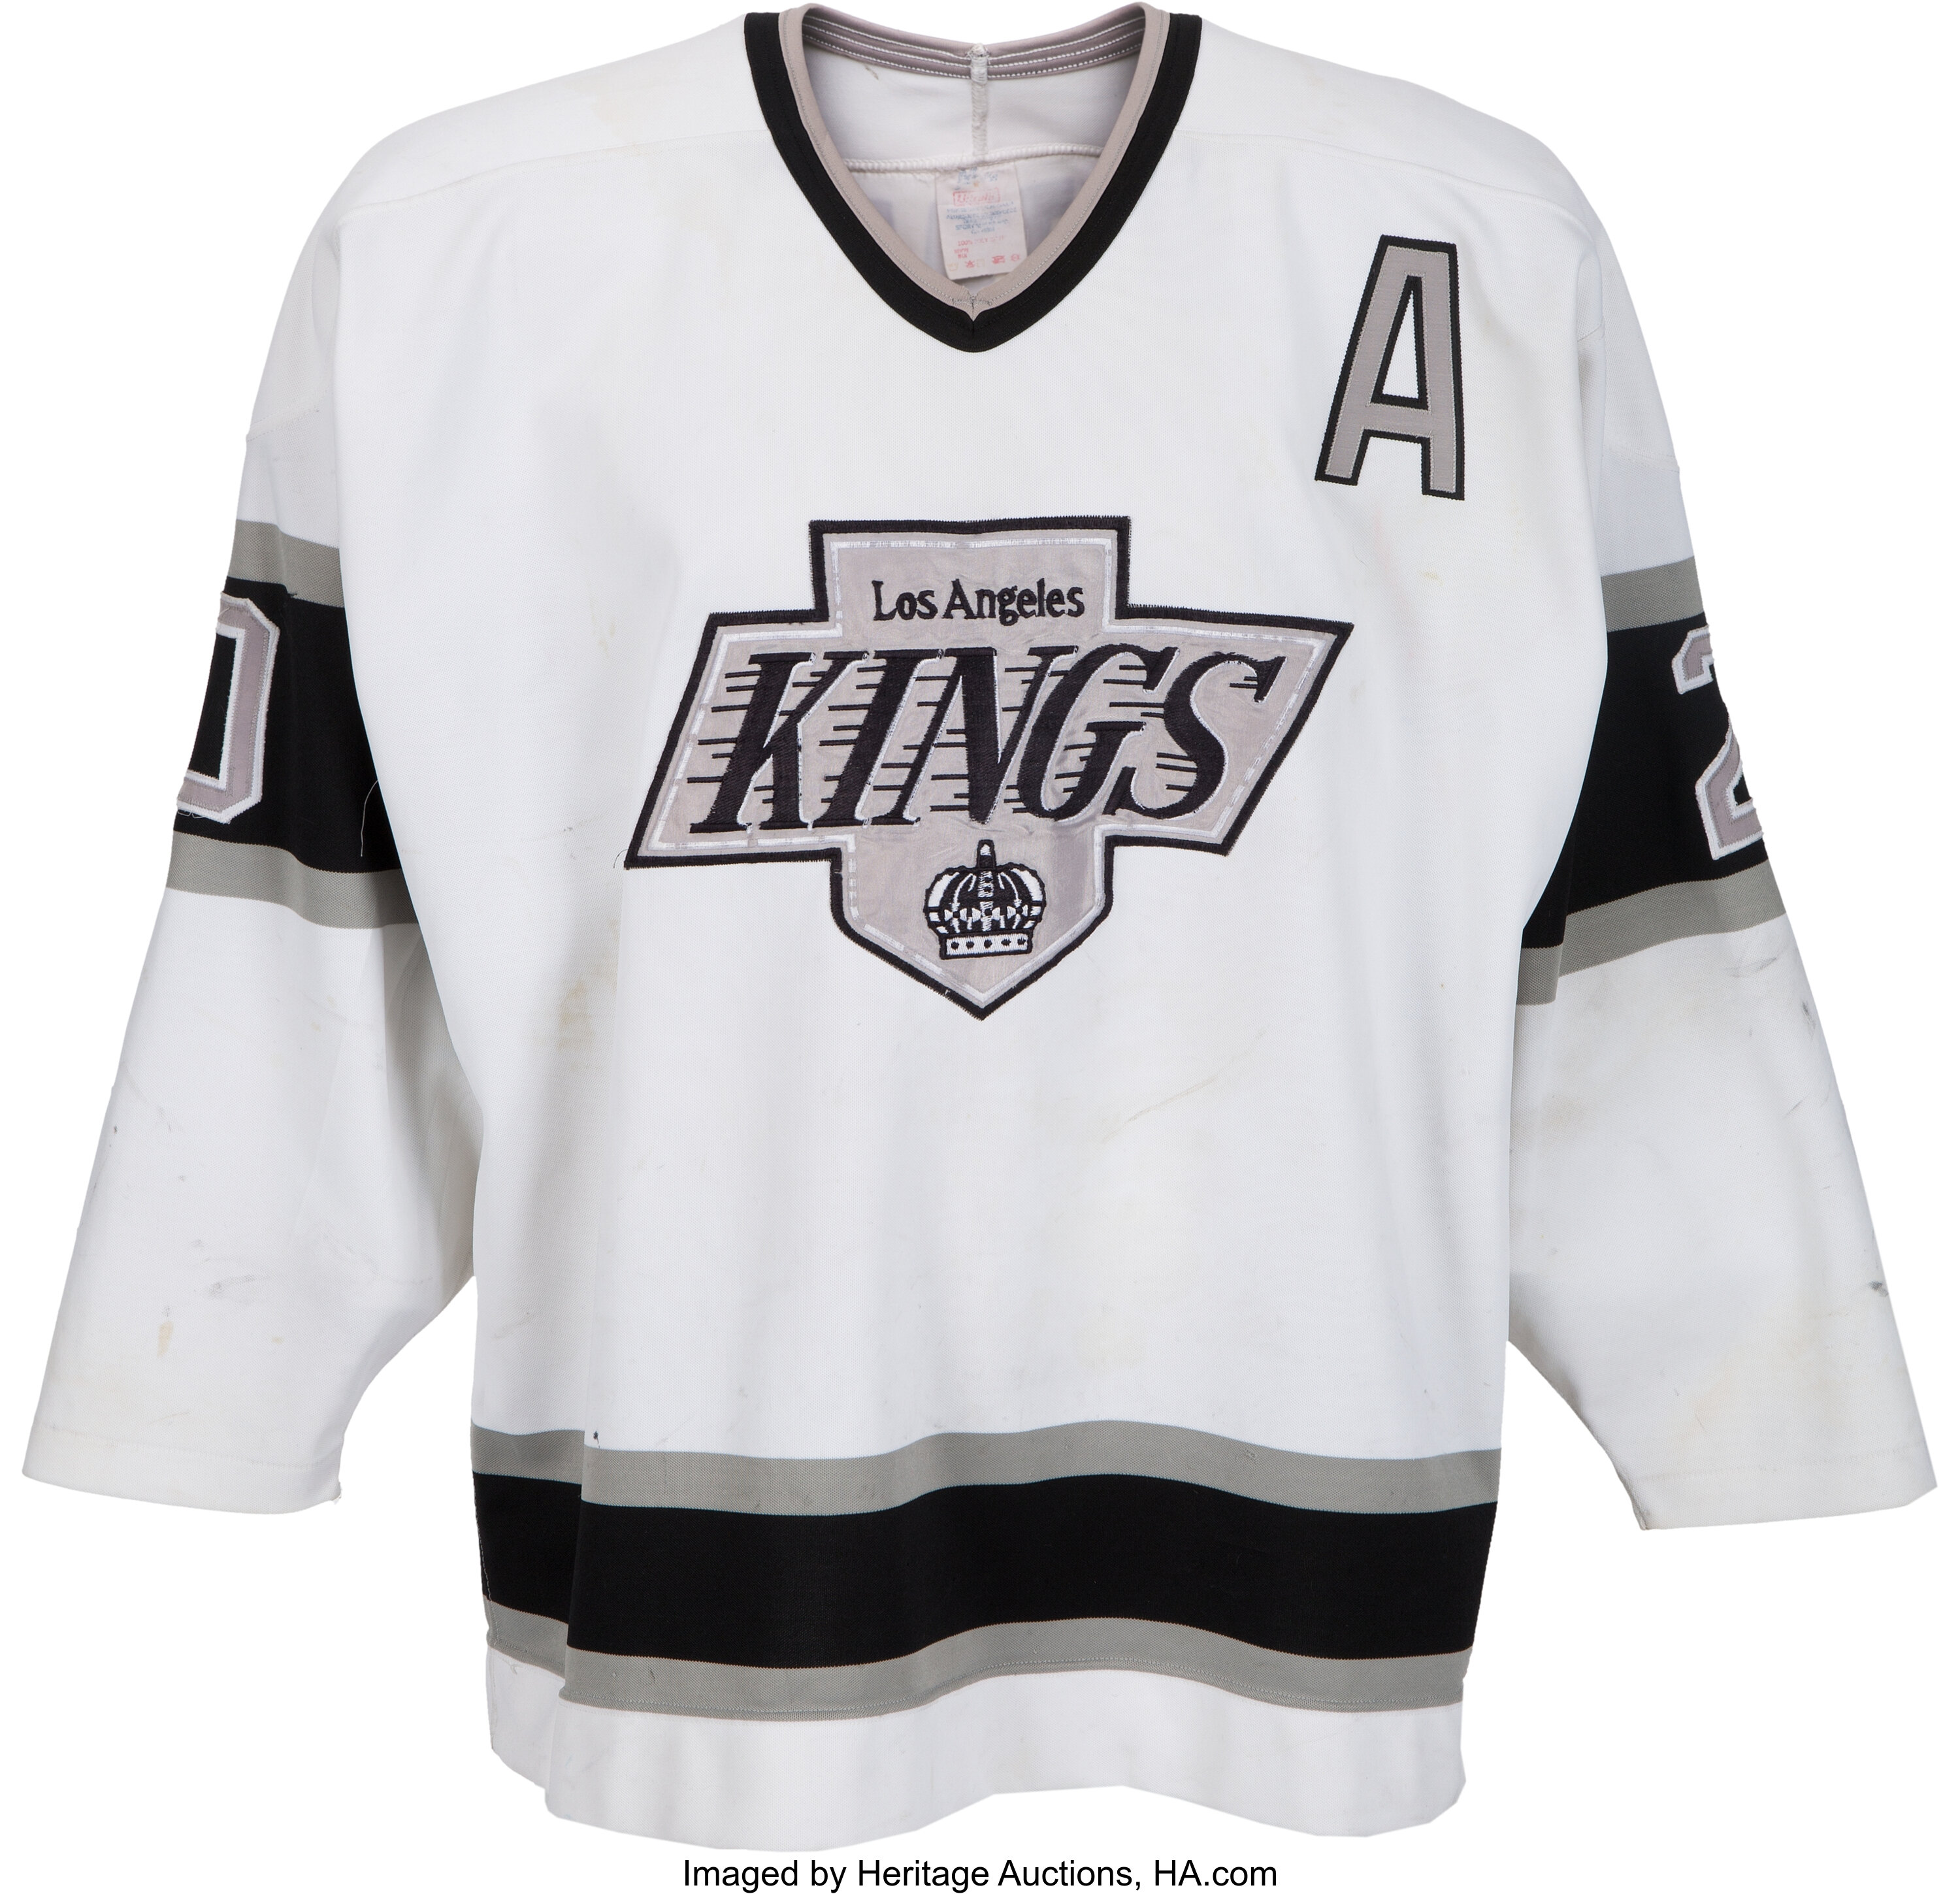 1999-2000 Luc Robitaille Game Worn Jersey. His future Hall of Fame